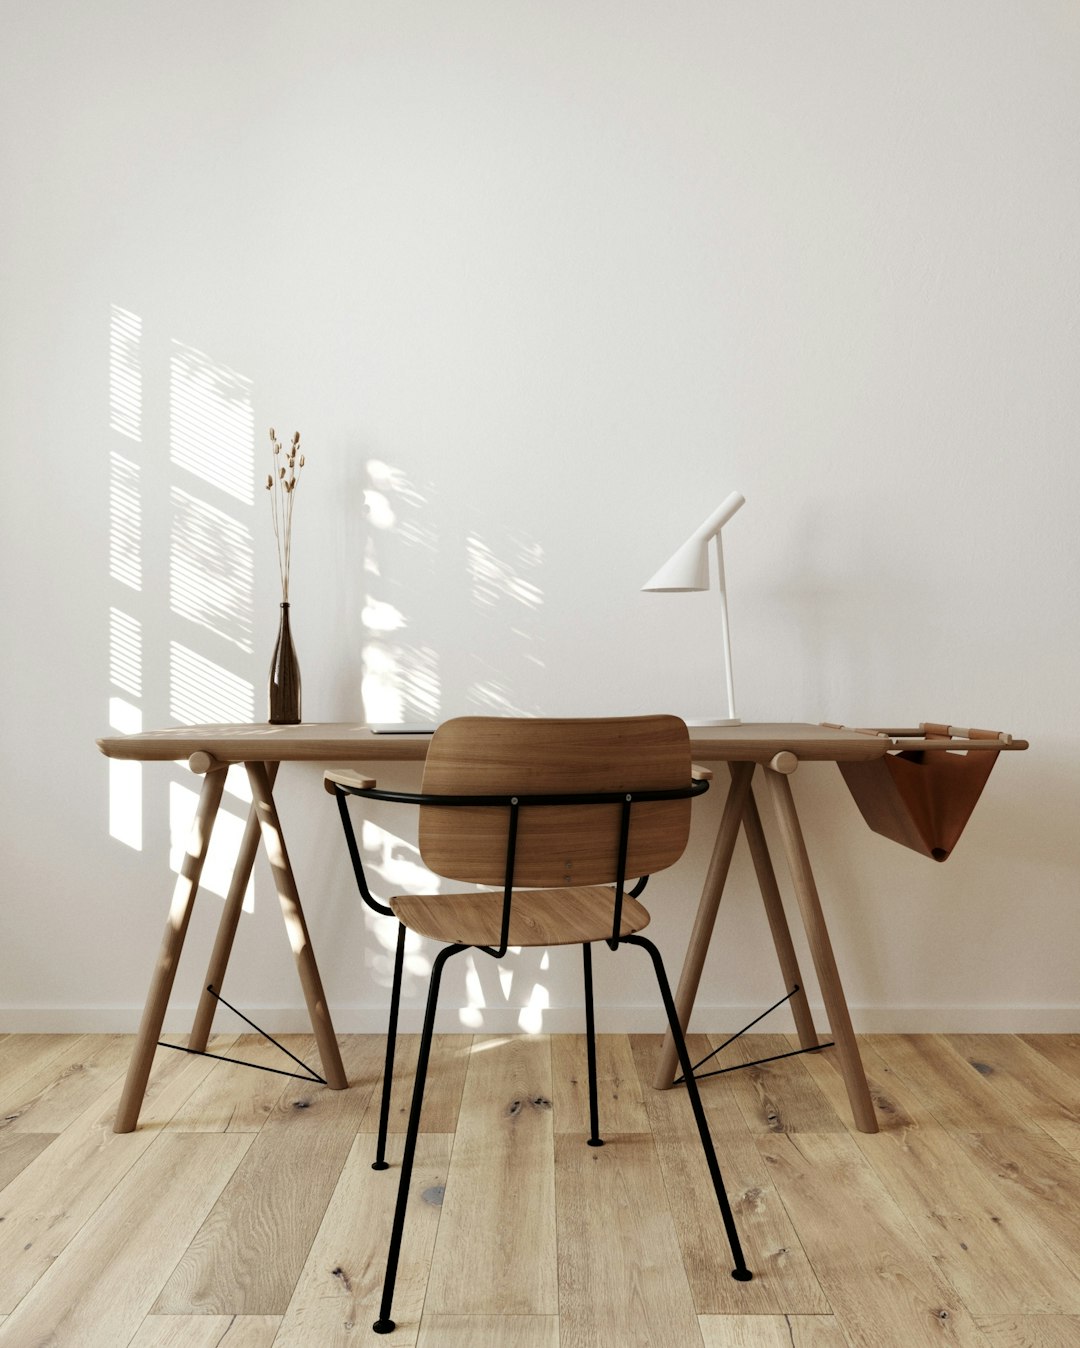 Designing a Modern Workspace with a Wooden Desk